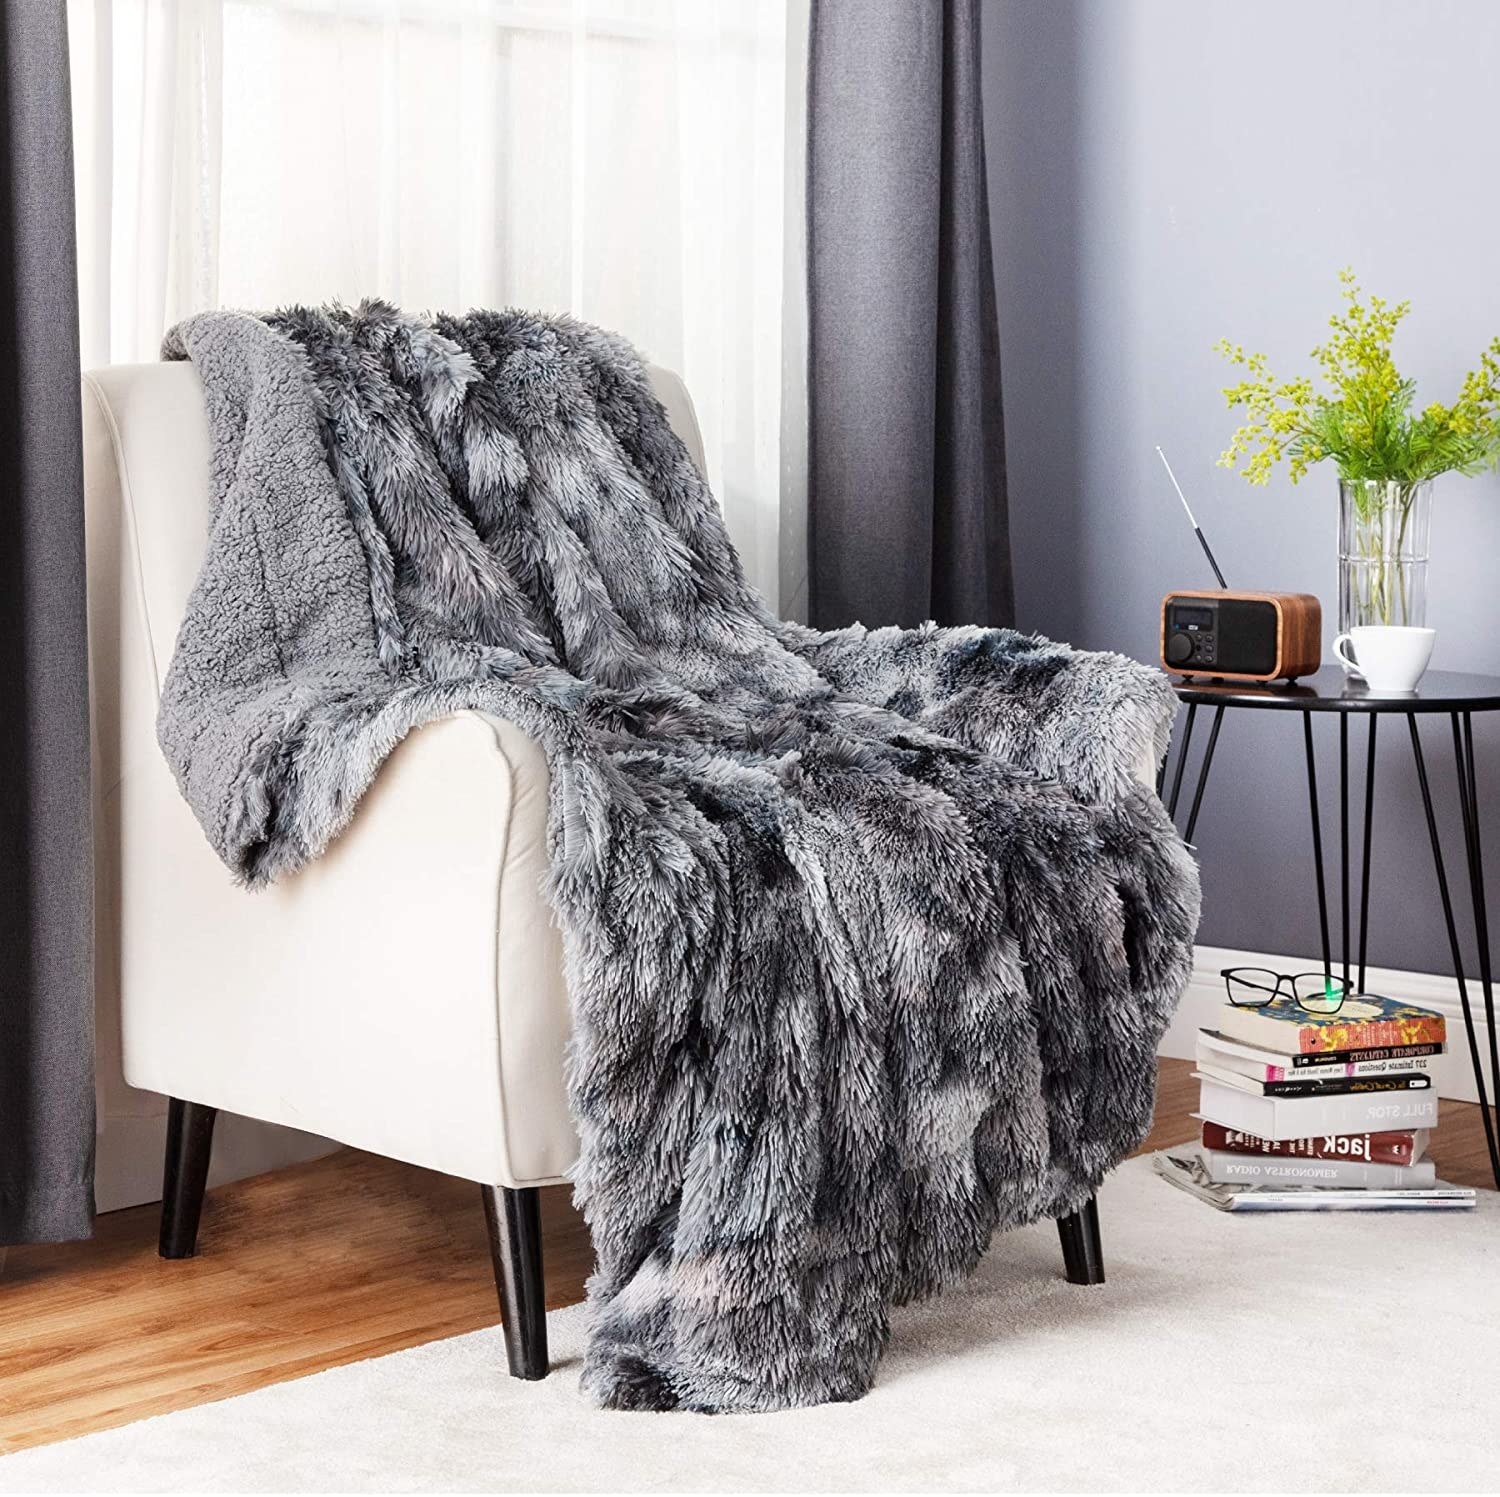 gray faux fur blanket draped over a white accent chair